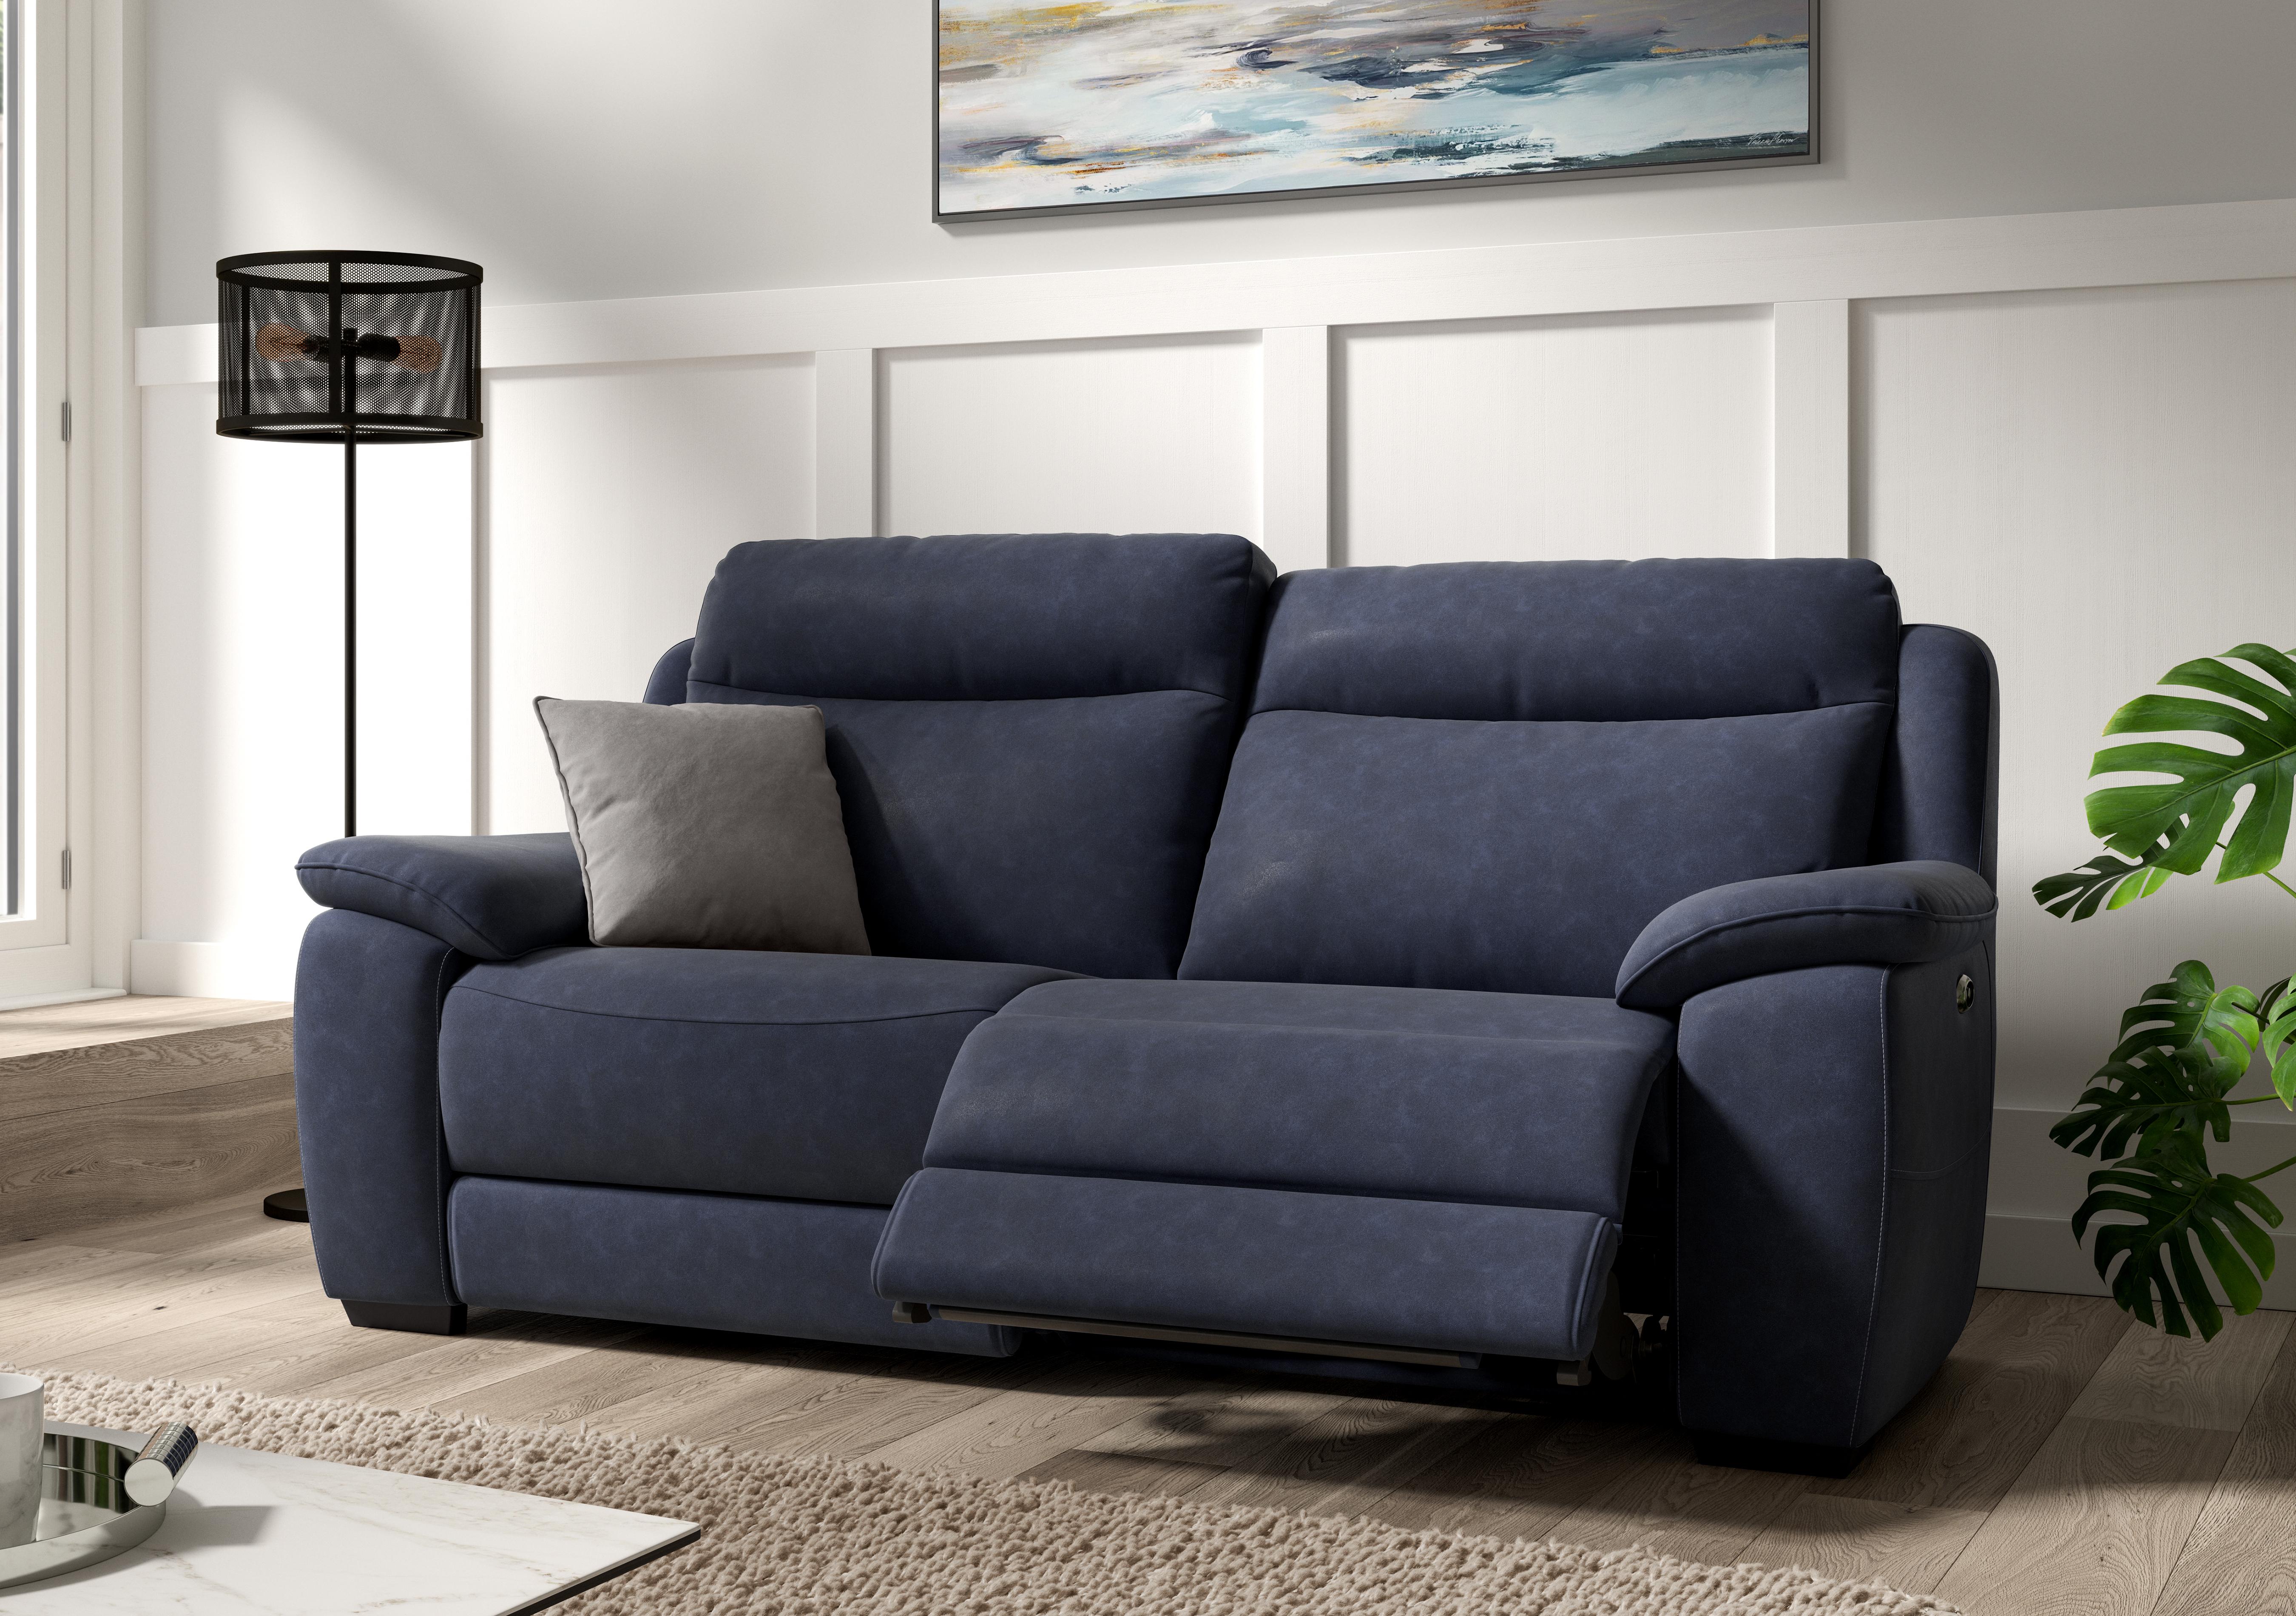 Starlight Express 3 Seater Fabric Sofa in  on Furniture Village